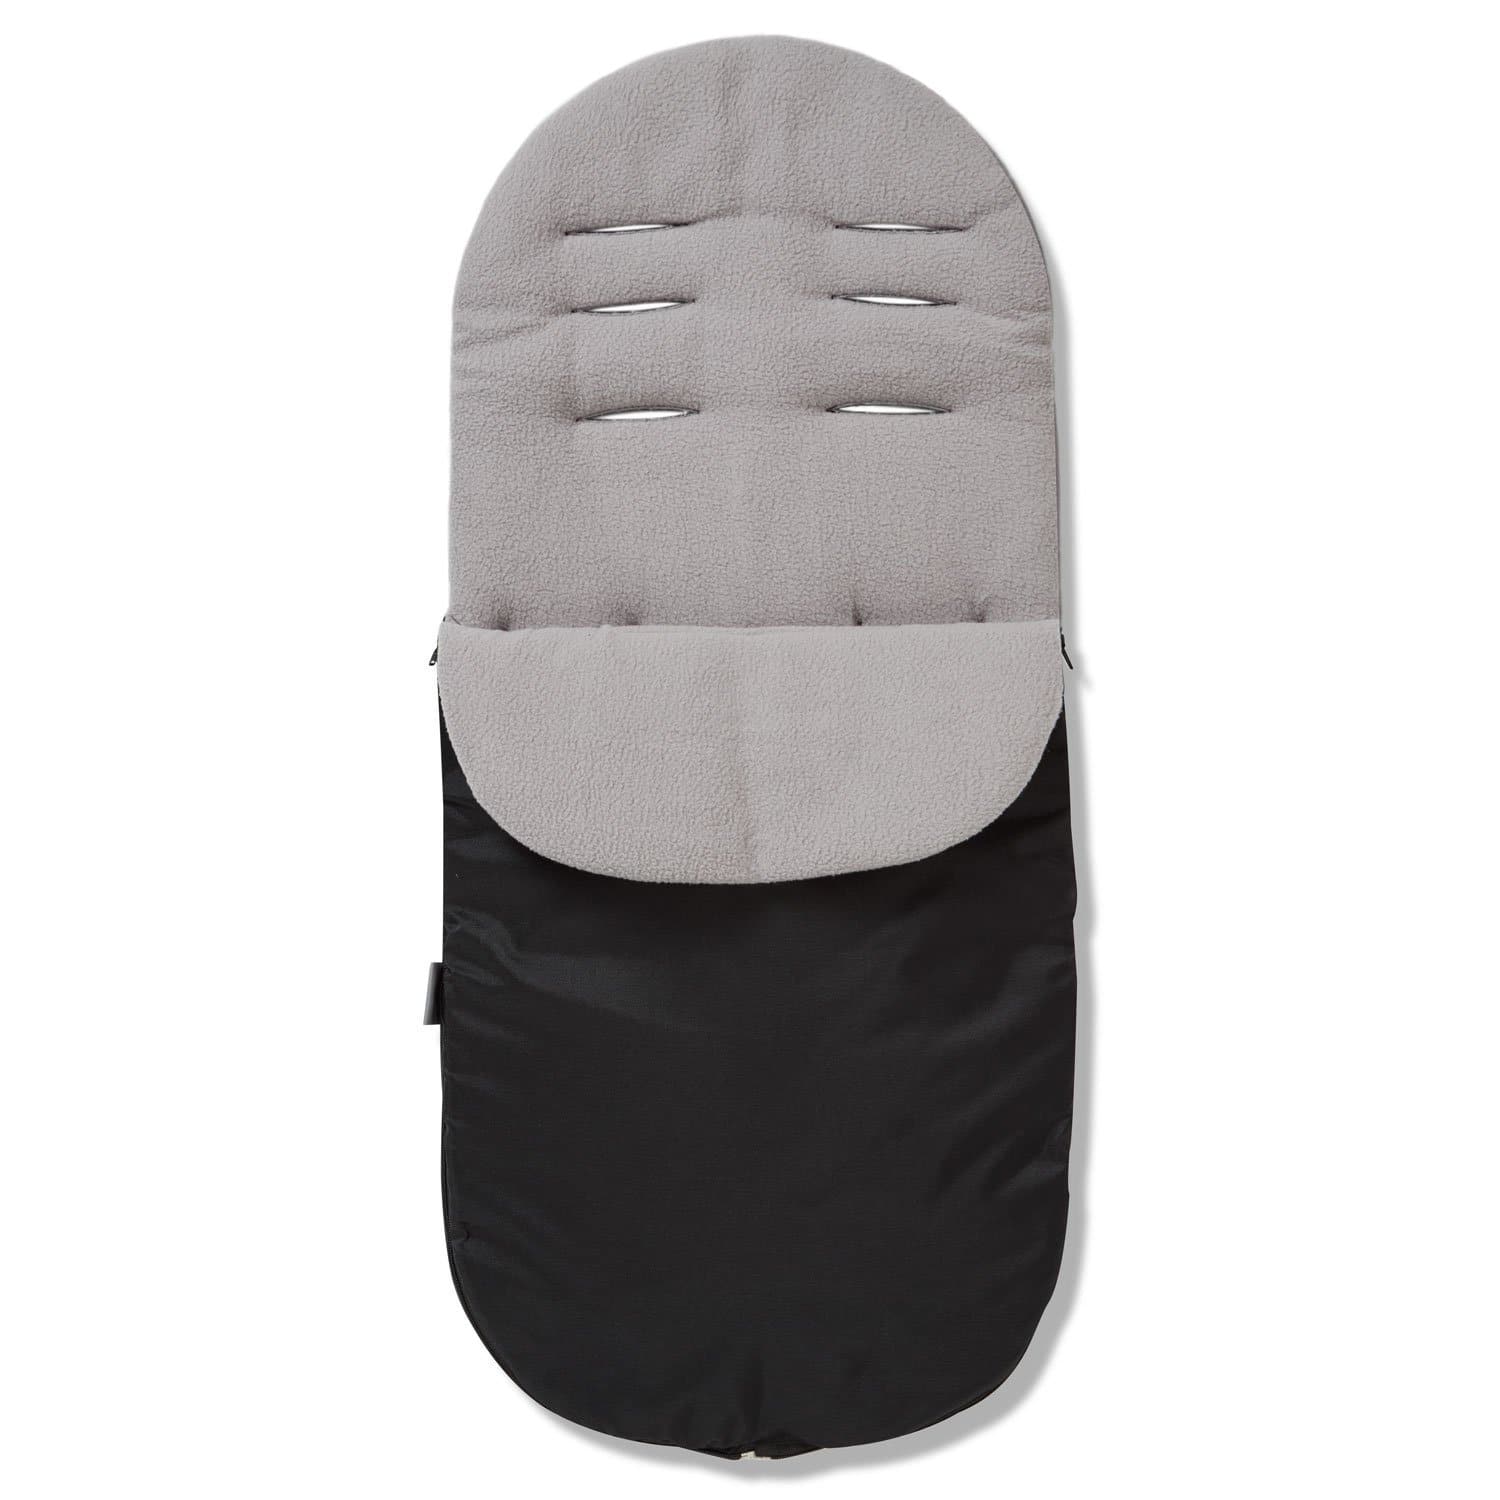 Footmuff / Cosy Toes Compatible with Mutsy - Grey / Fits All Models | For Your Little One